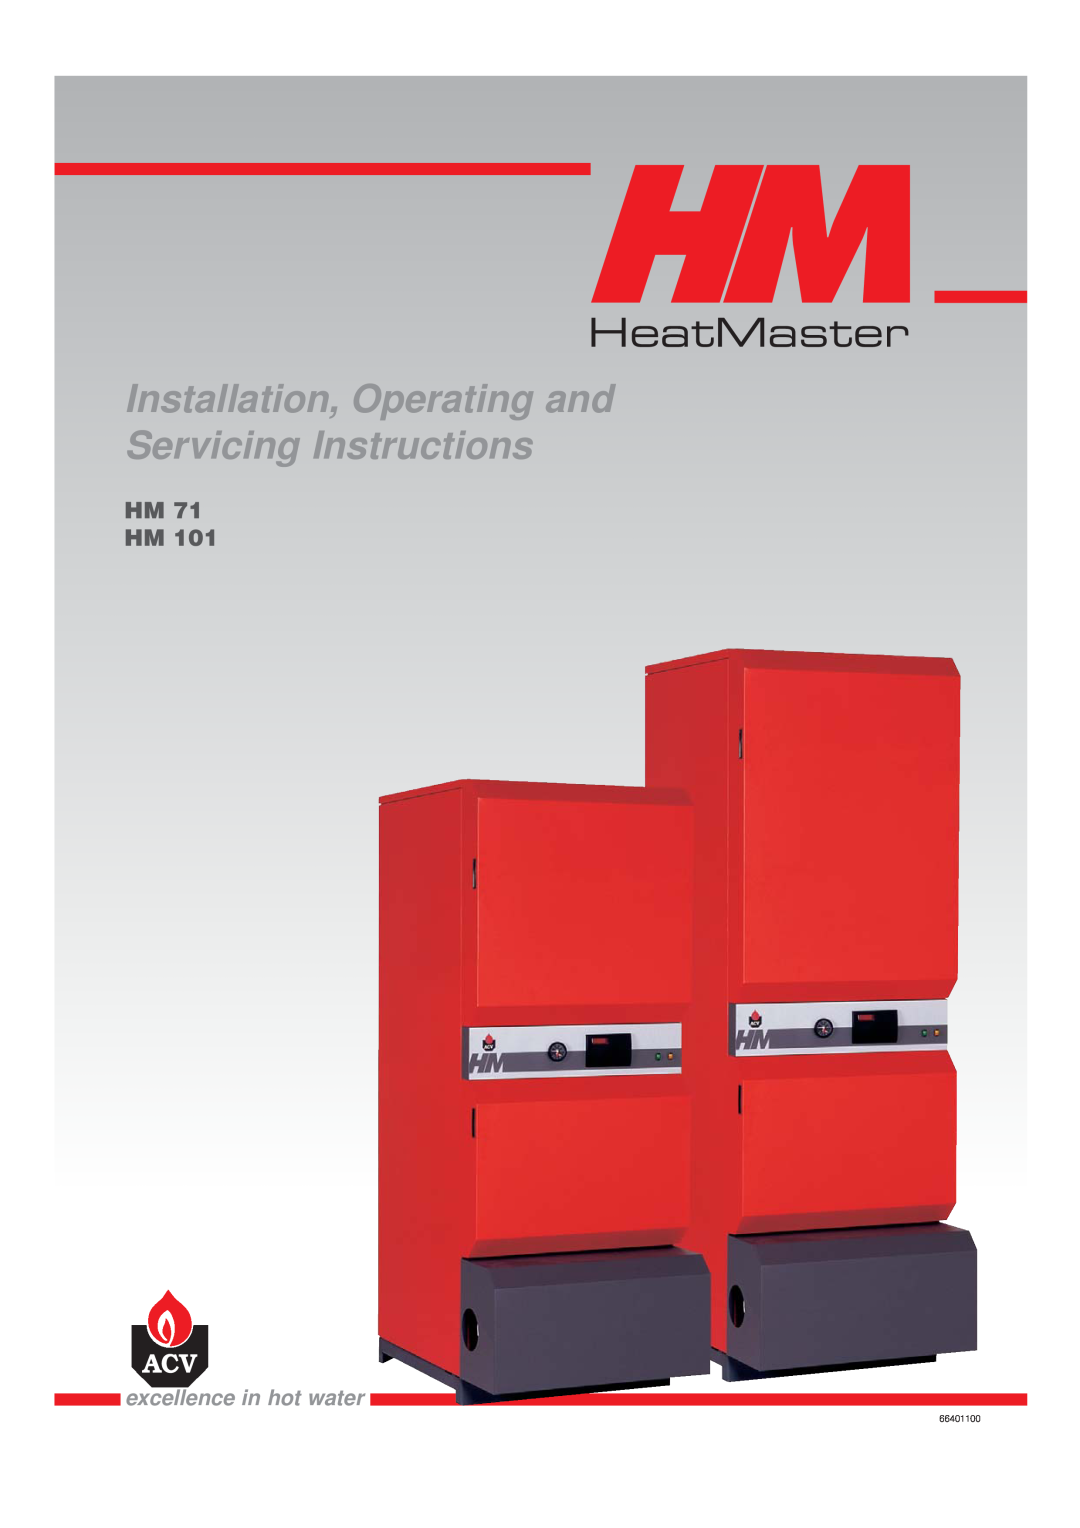 Heatmaster HM 71 manual HeatMaster, Installation, Operating and, Servicing Instructions, Hm Hm, excellence in hot water 